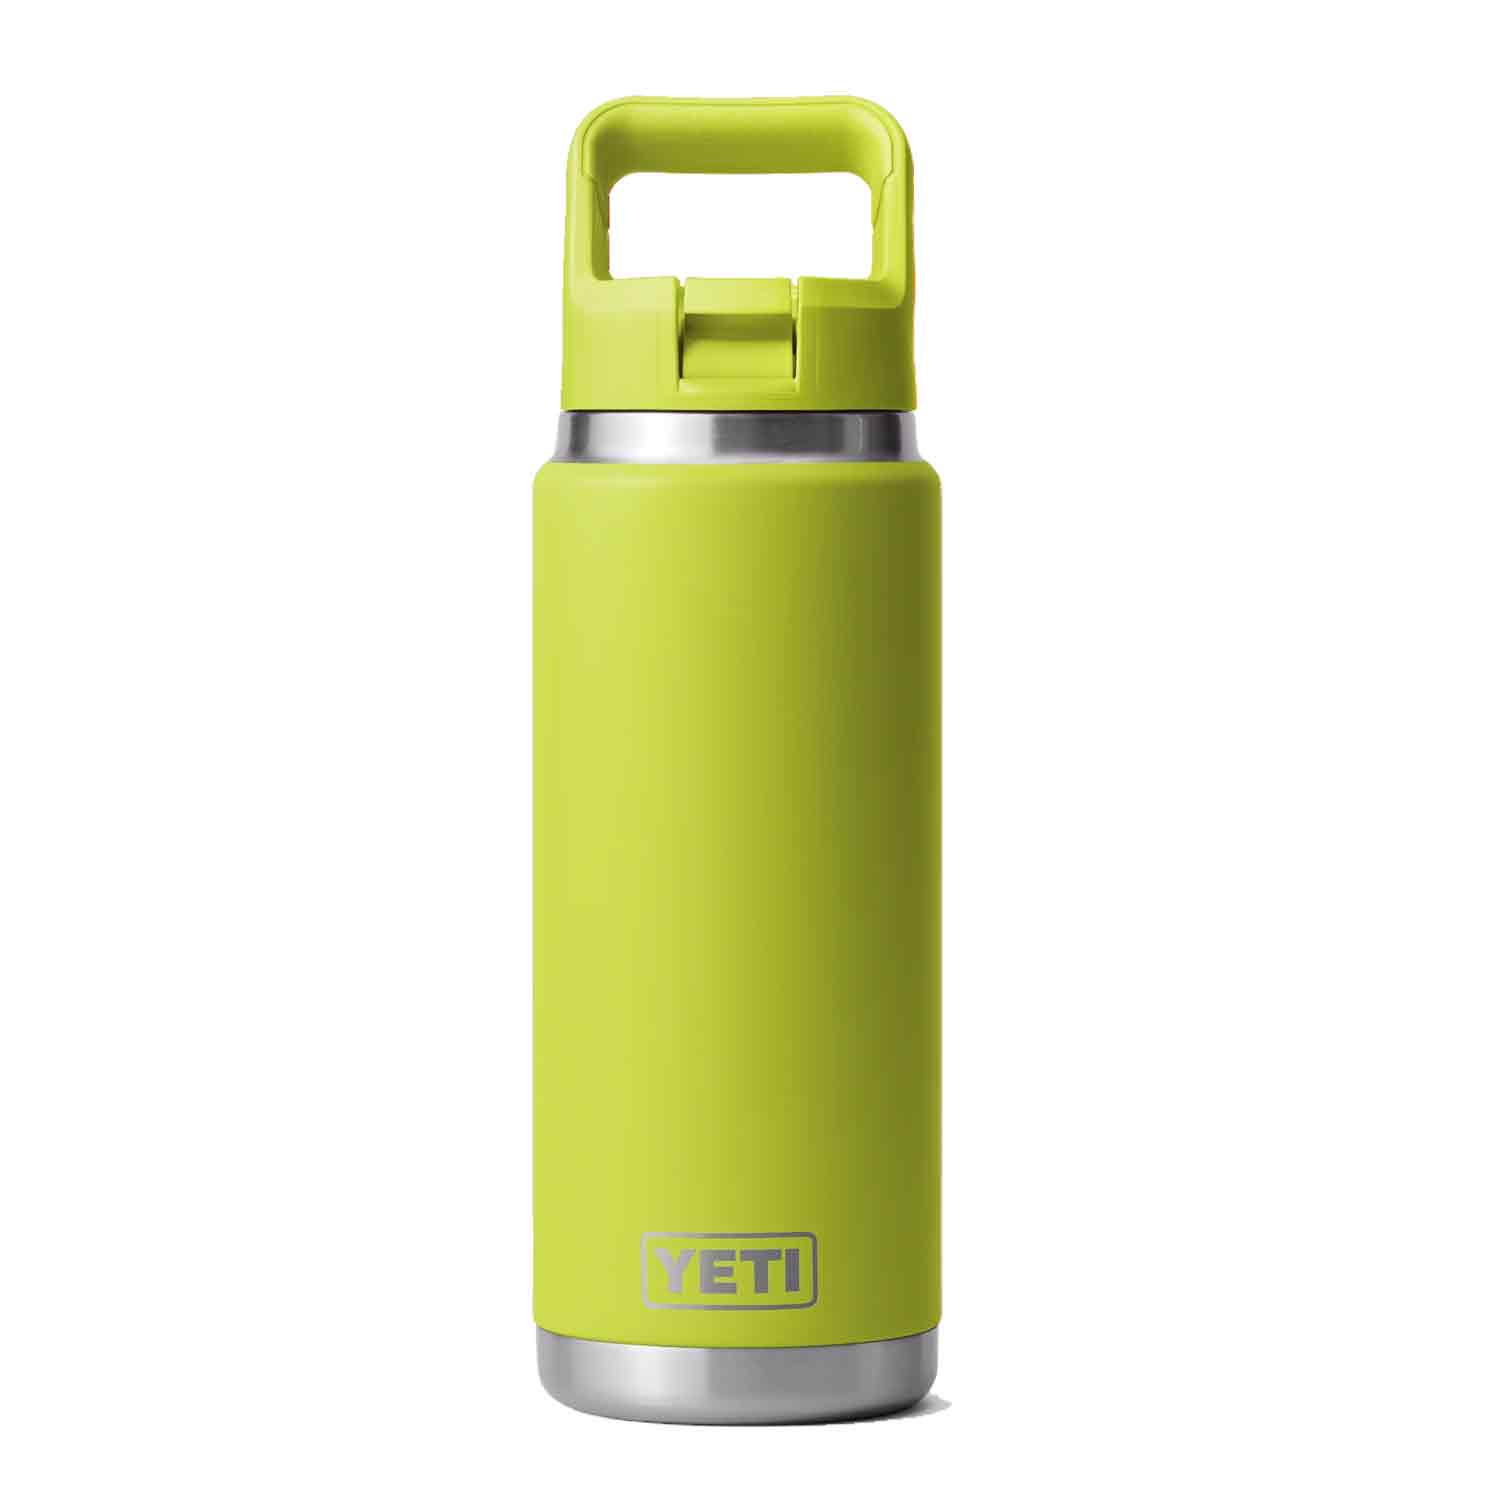 YETI Rambler 26oz Bottle with Colored Straw Lid